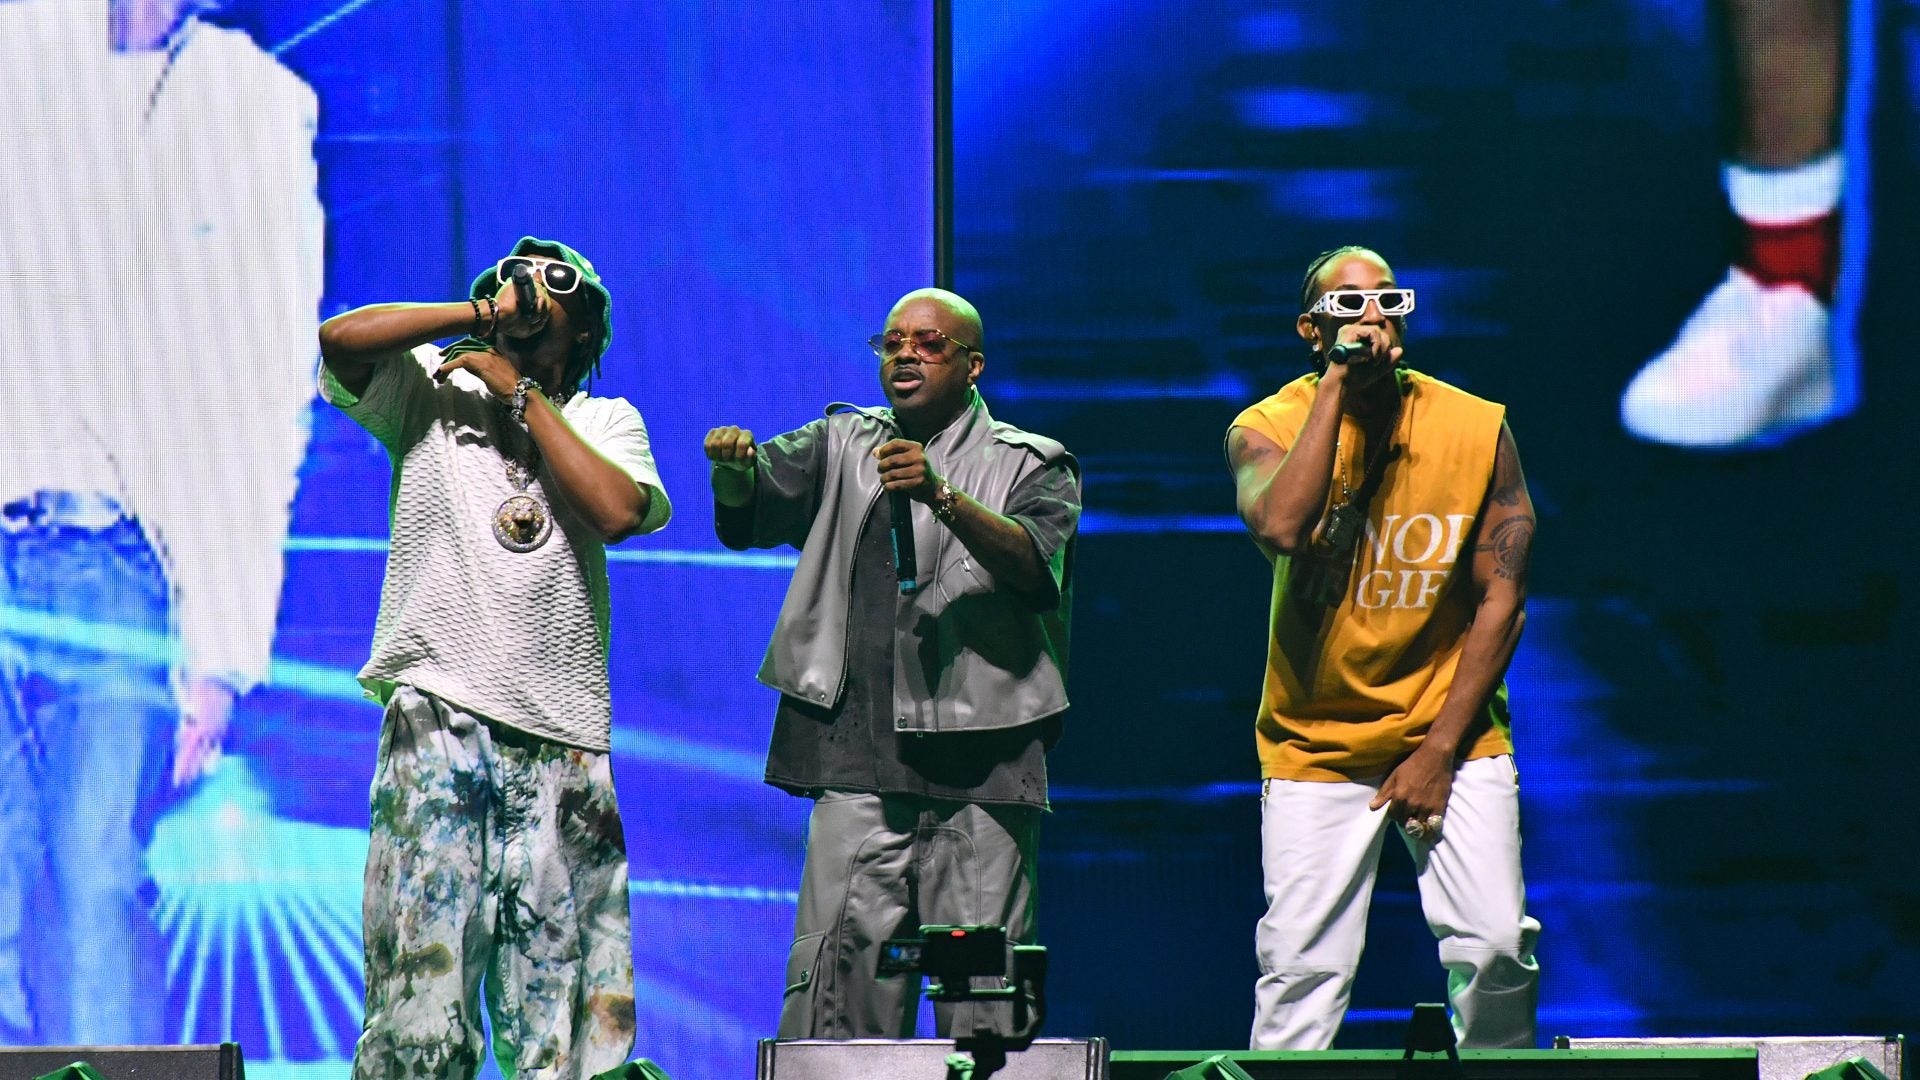 Jermaine Dupri Pays Homage To ATL's Hip-Hop History With A Curated Dirty South Set At ESSENCE Festival